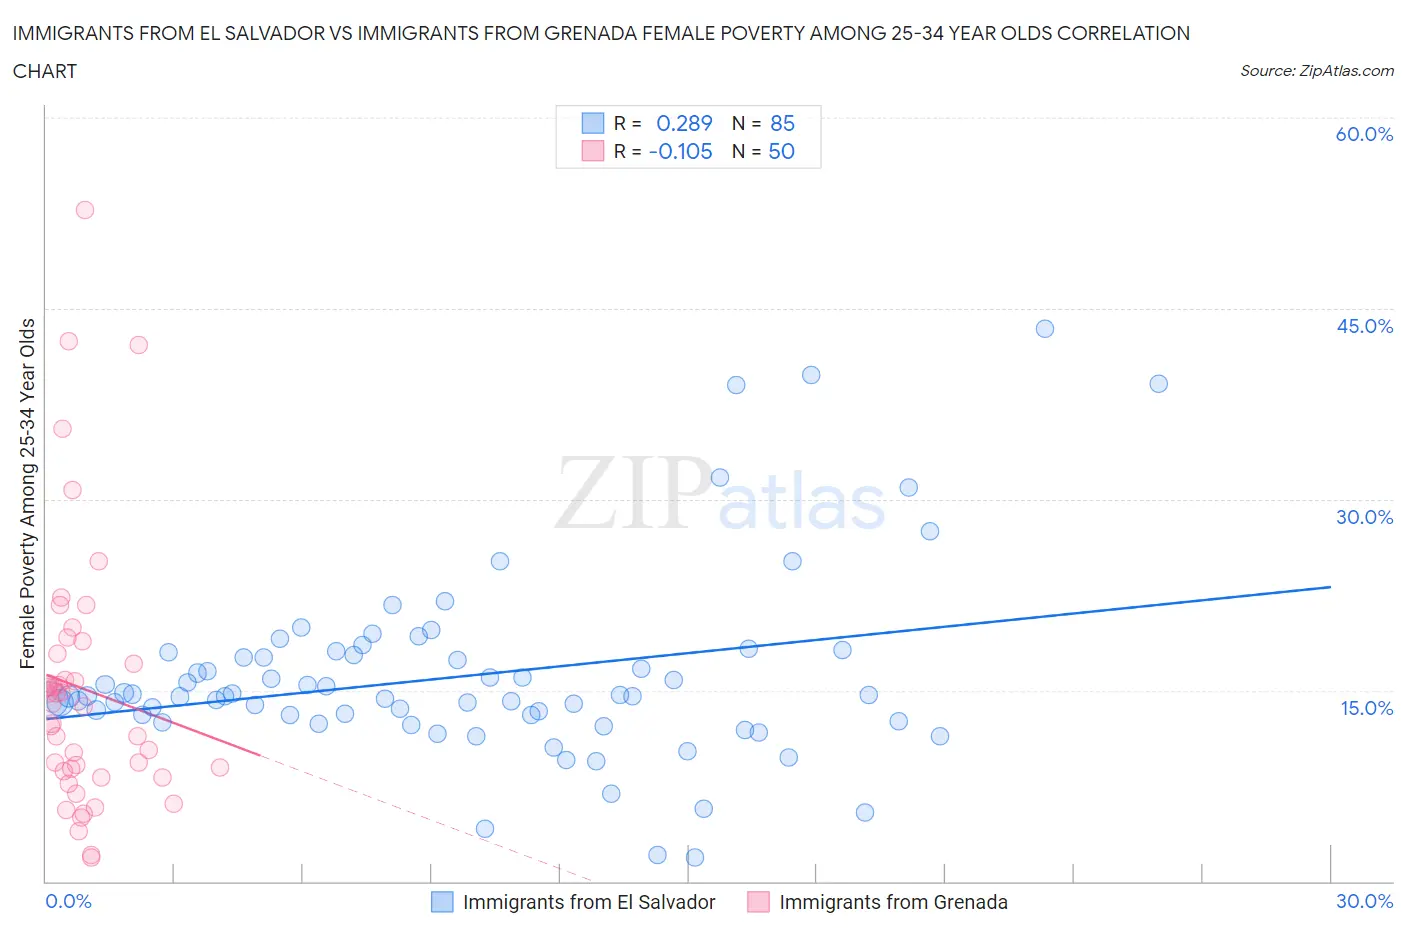 Immigrants from El Salvador vs Immigrants from Grenada Female Poverty Among 25-34 Year Olds